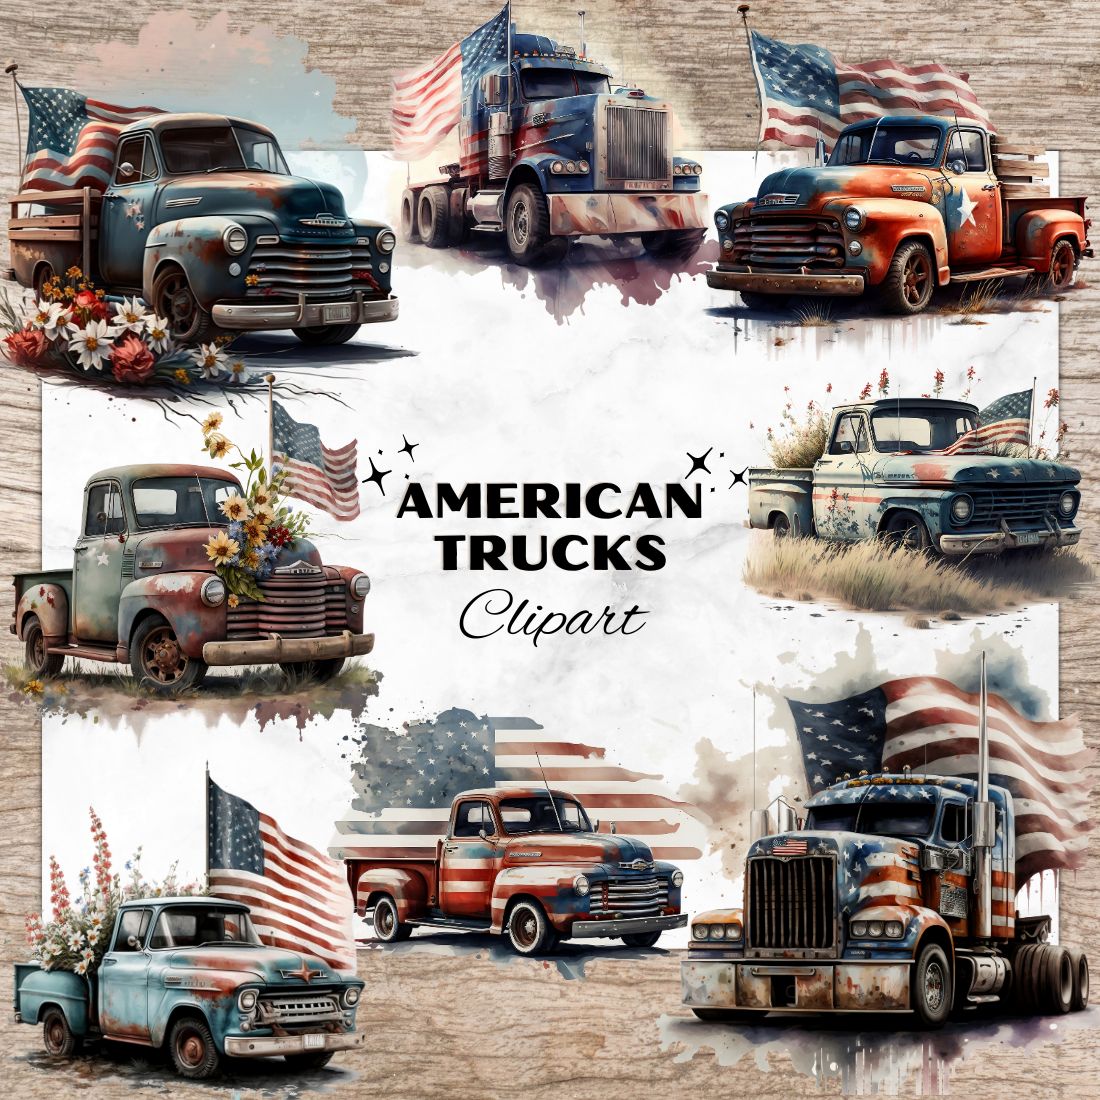 11 American 4th of July Truck PNG, American Trucks Watercolor Clipart, Transparent PNG, Digital Paper Craft, Watercolor Clipart for Scrapbook, Invitation, Wall Art, T-Shirt Design cover image.